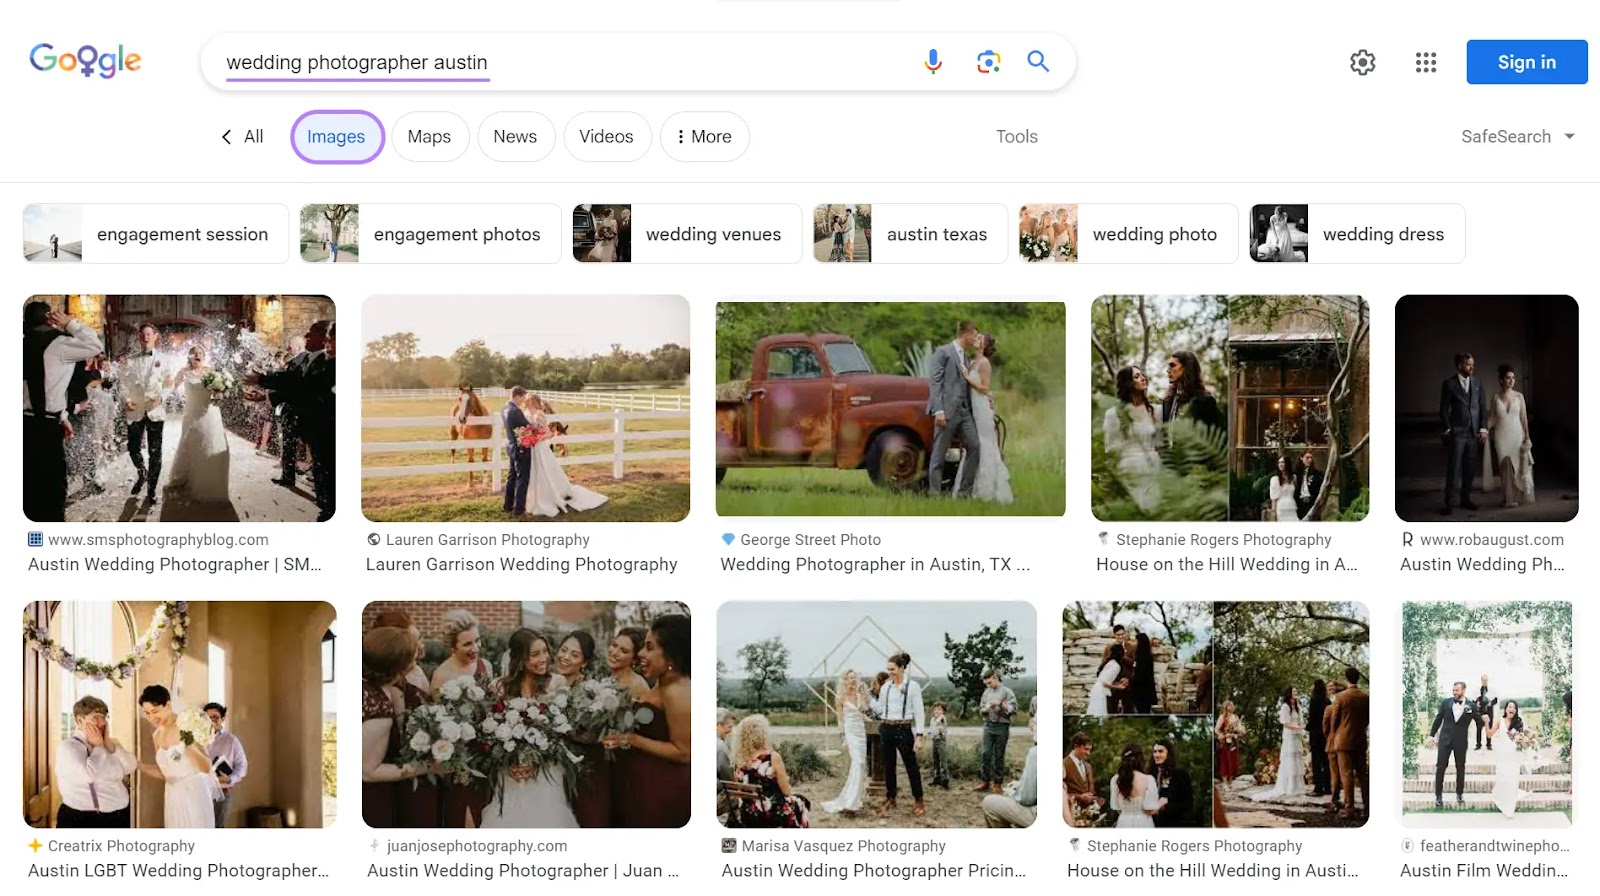 "Images" results on Google for "wedding photographer austin" query